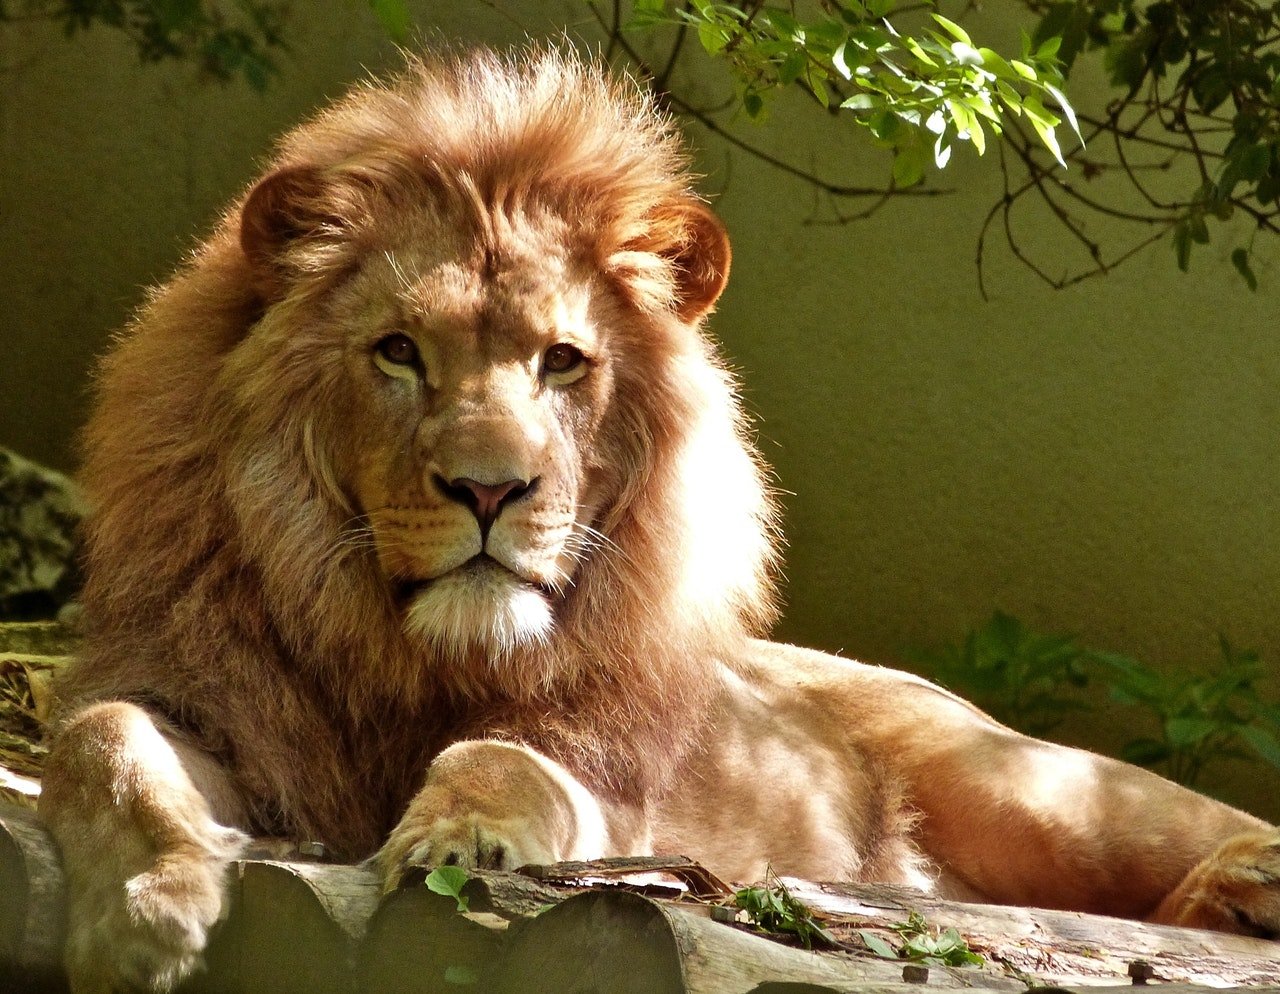 Photo of a lion lying down | Photo: Pexels